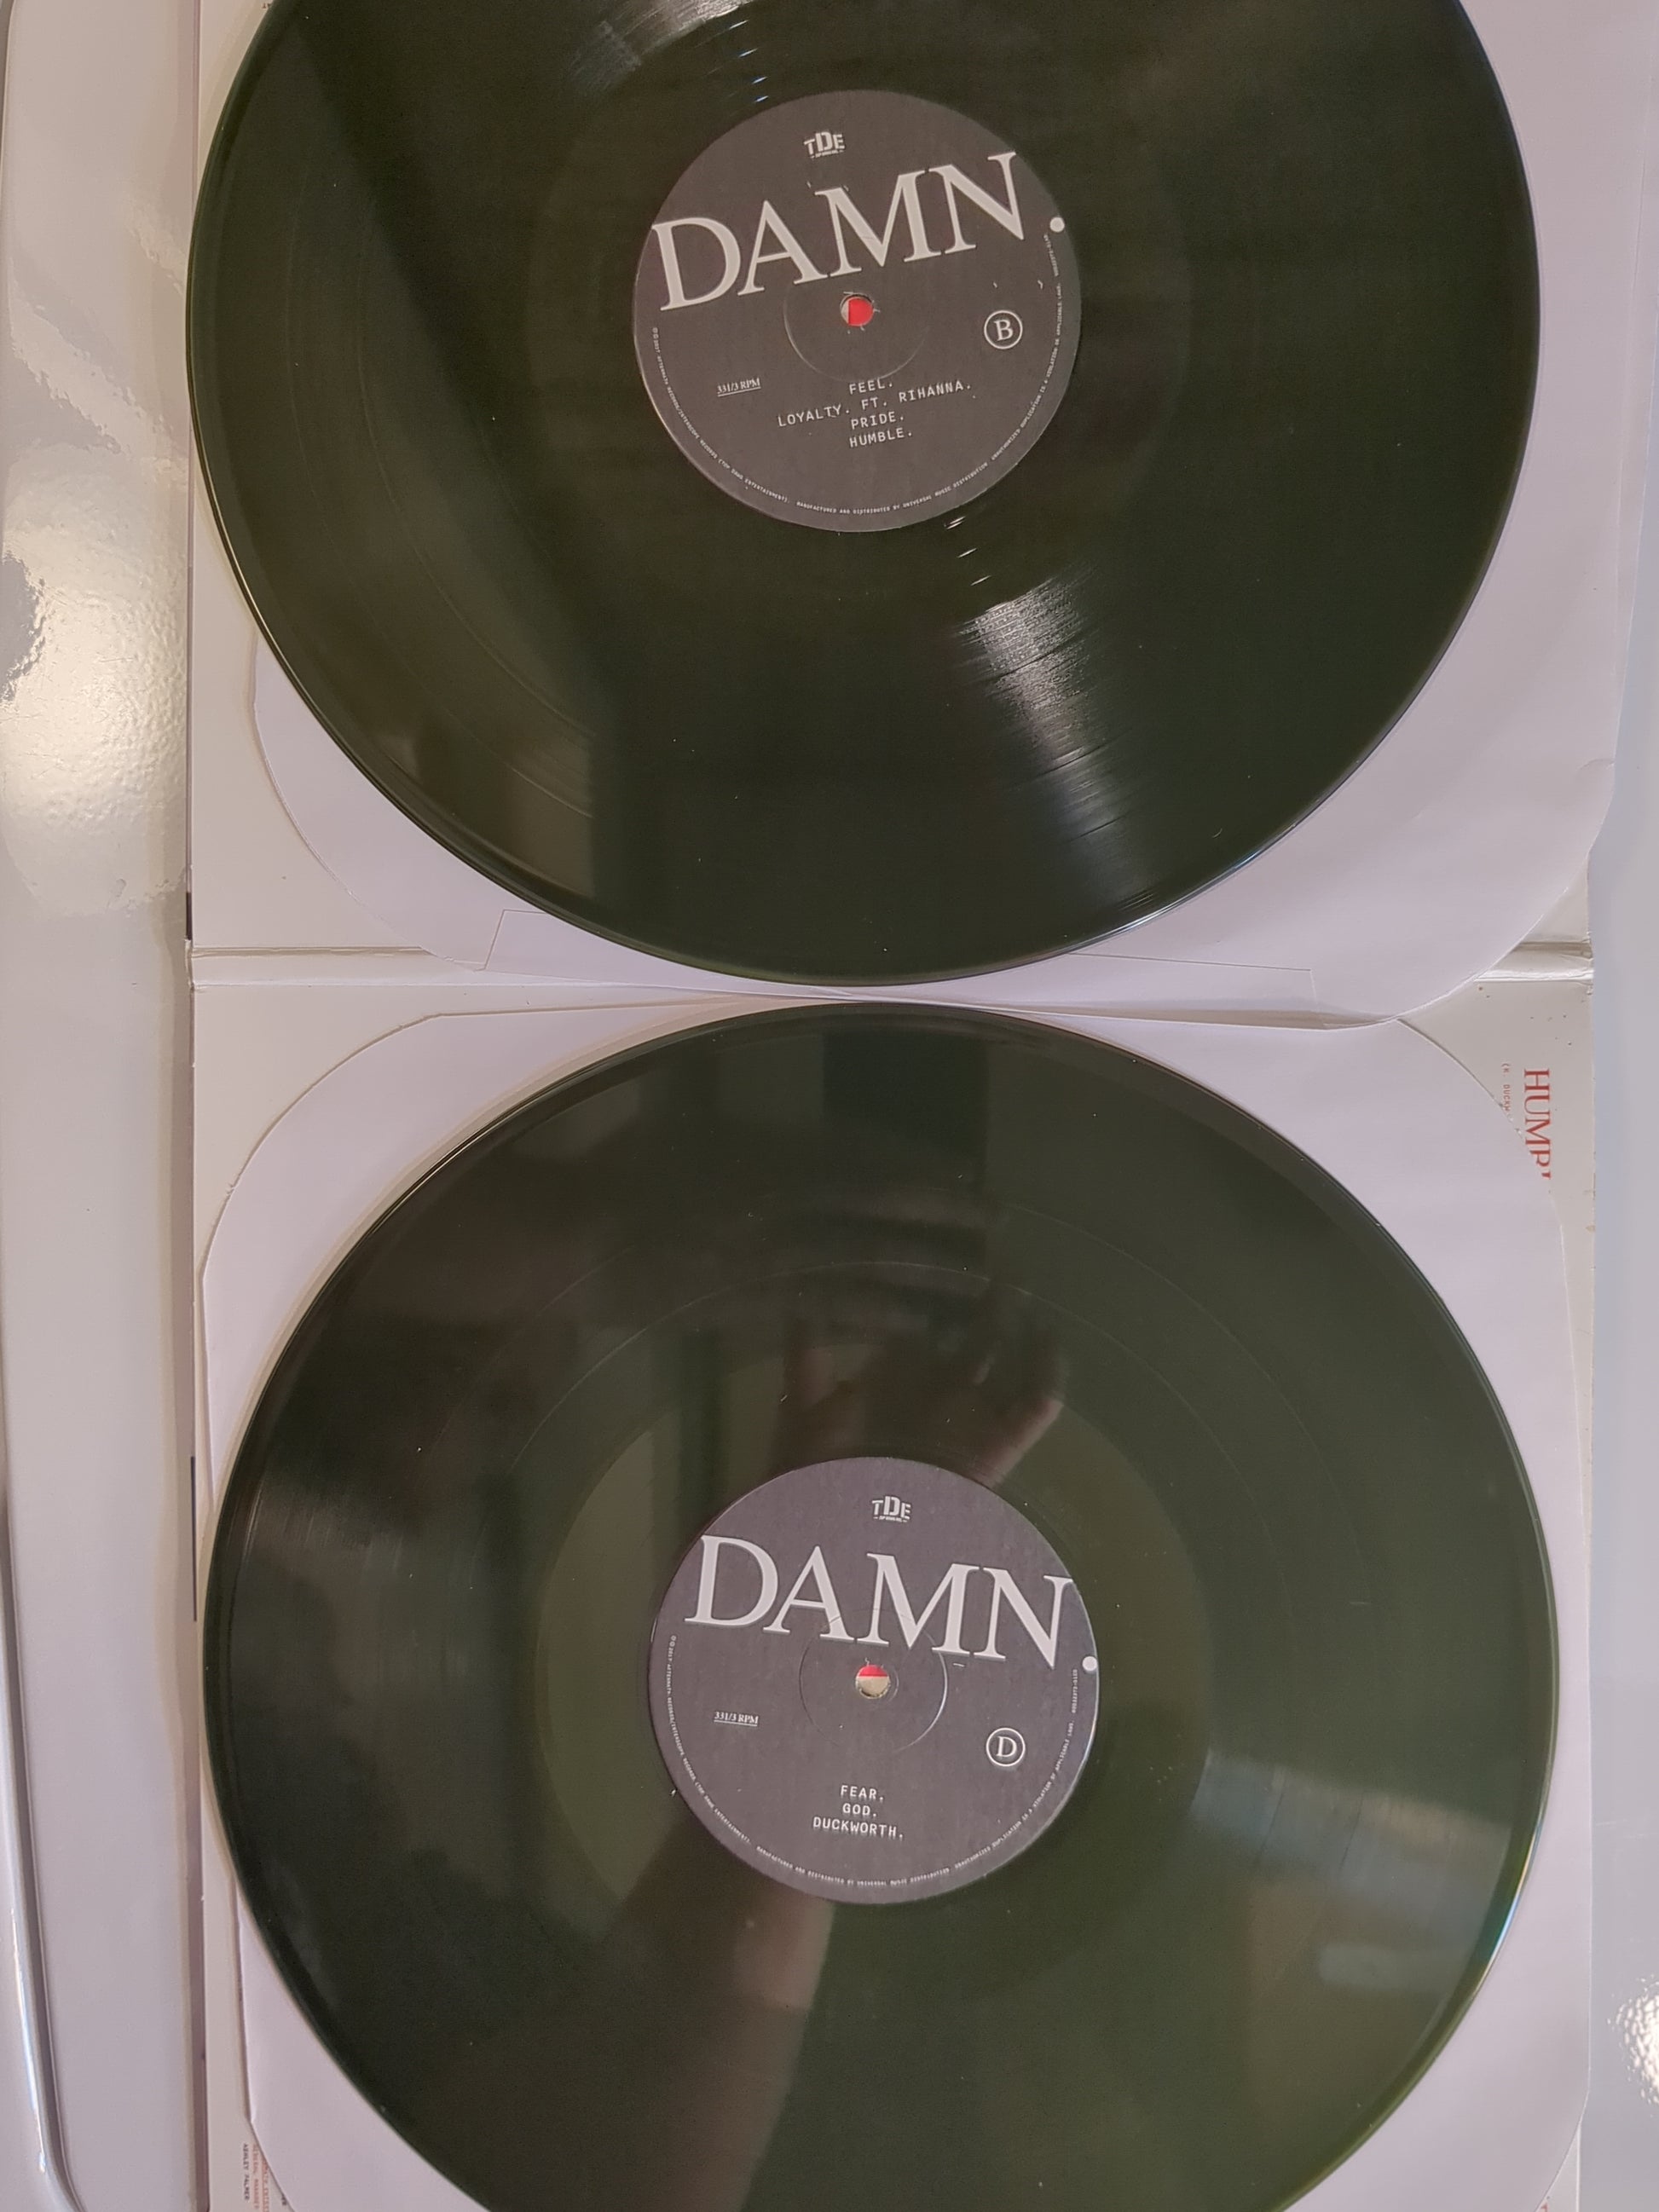 As a vinyl collector and an extreme Kendrick fanmy life is now complete  😅 : r/KendrickLamar